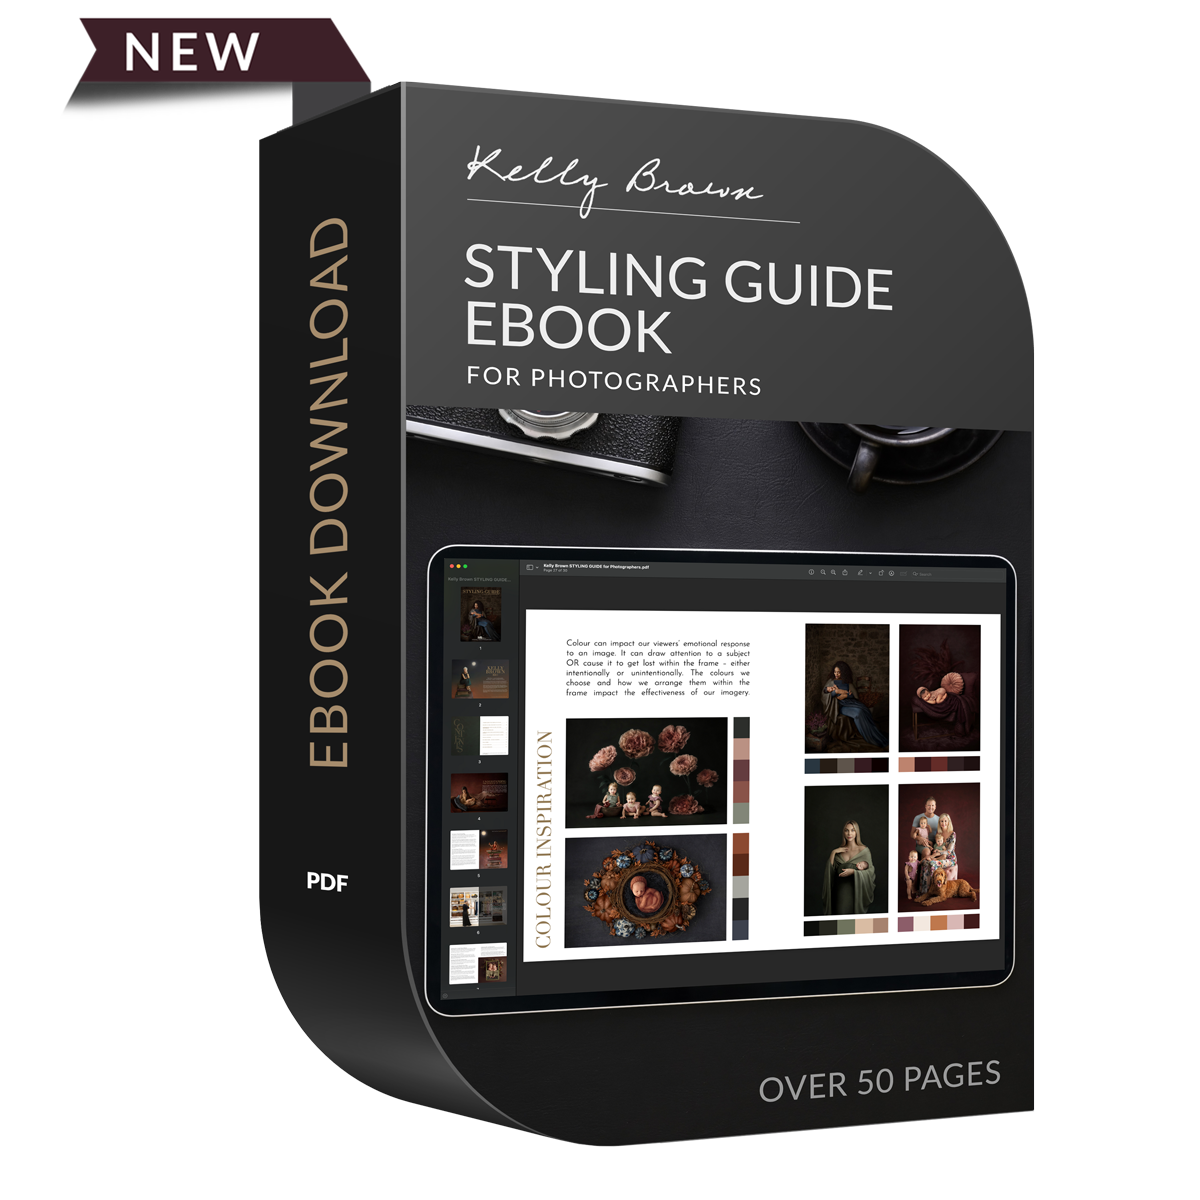 Styling Guide for Photographers